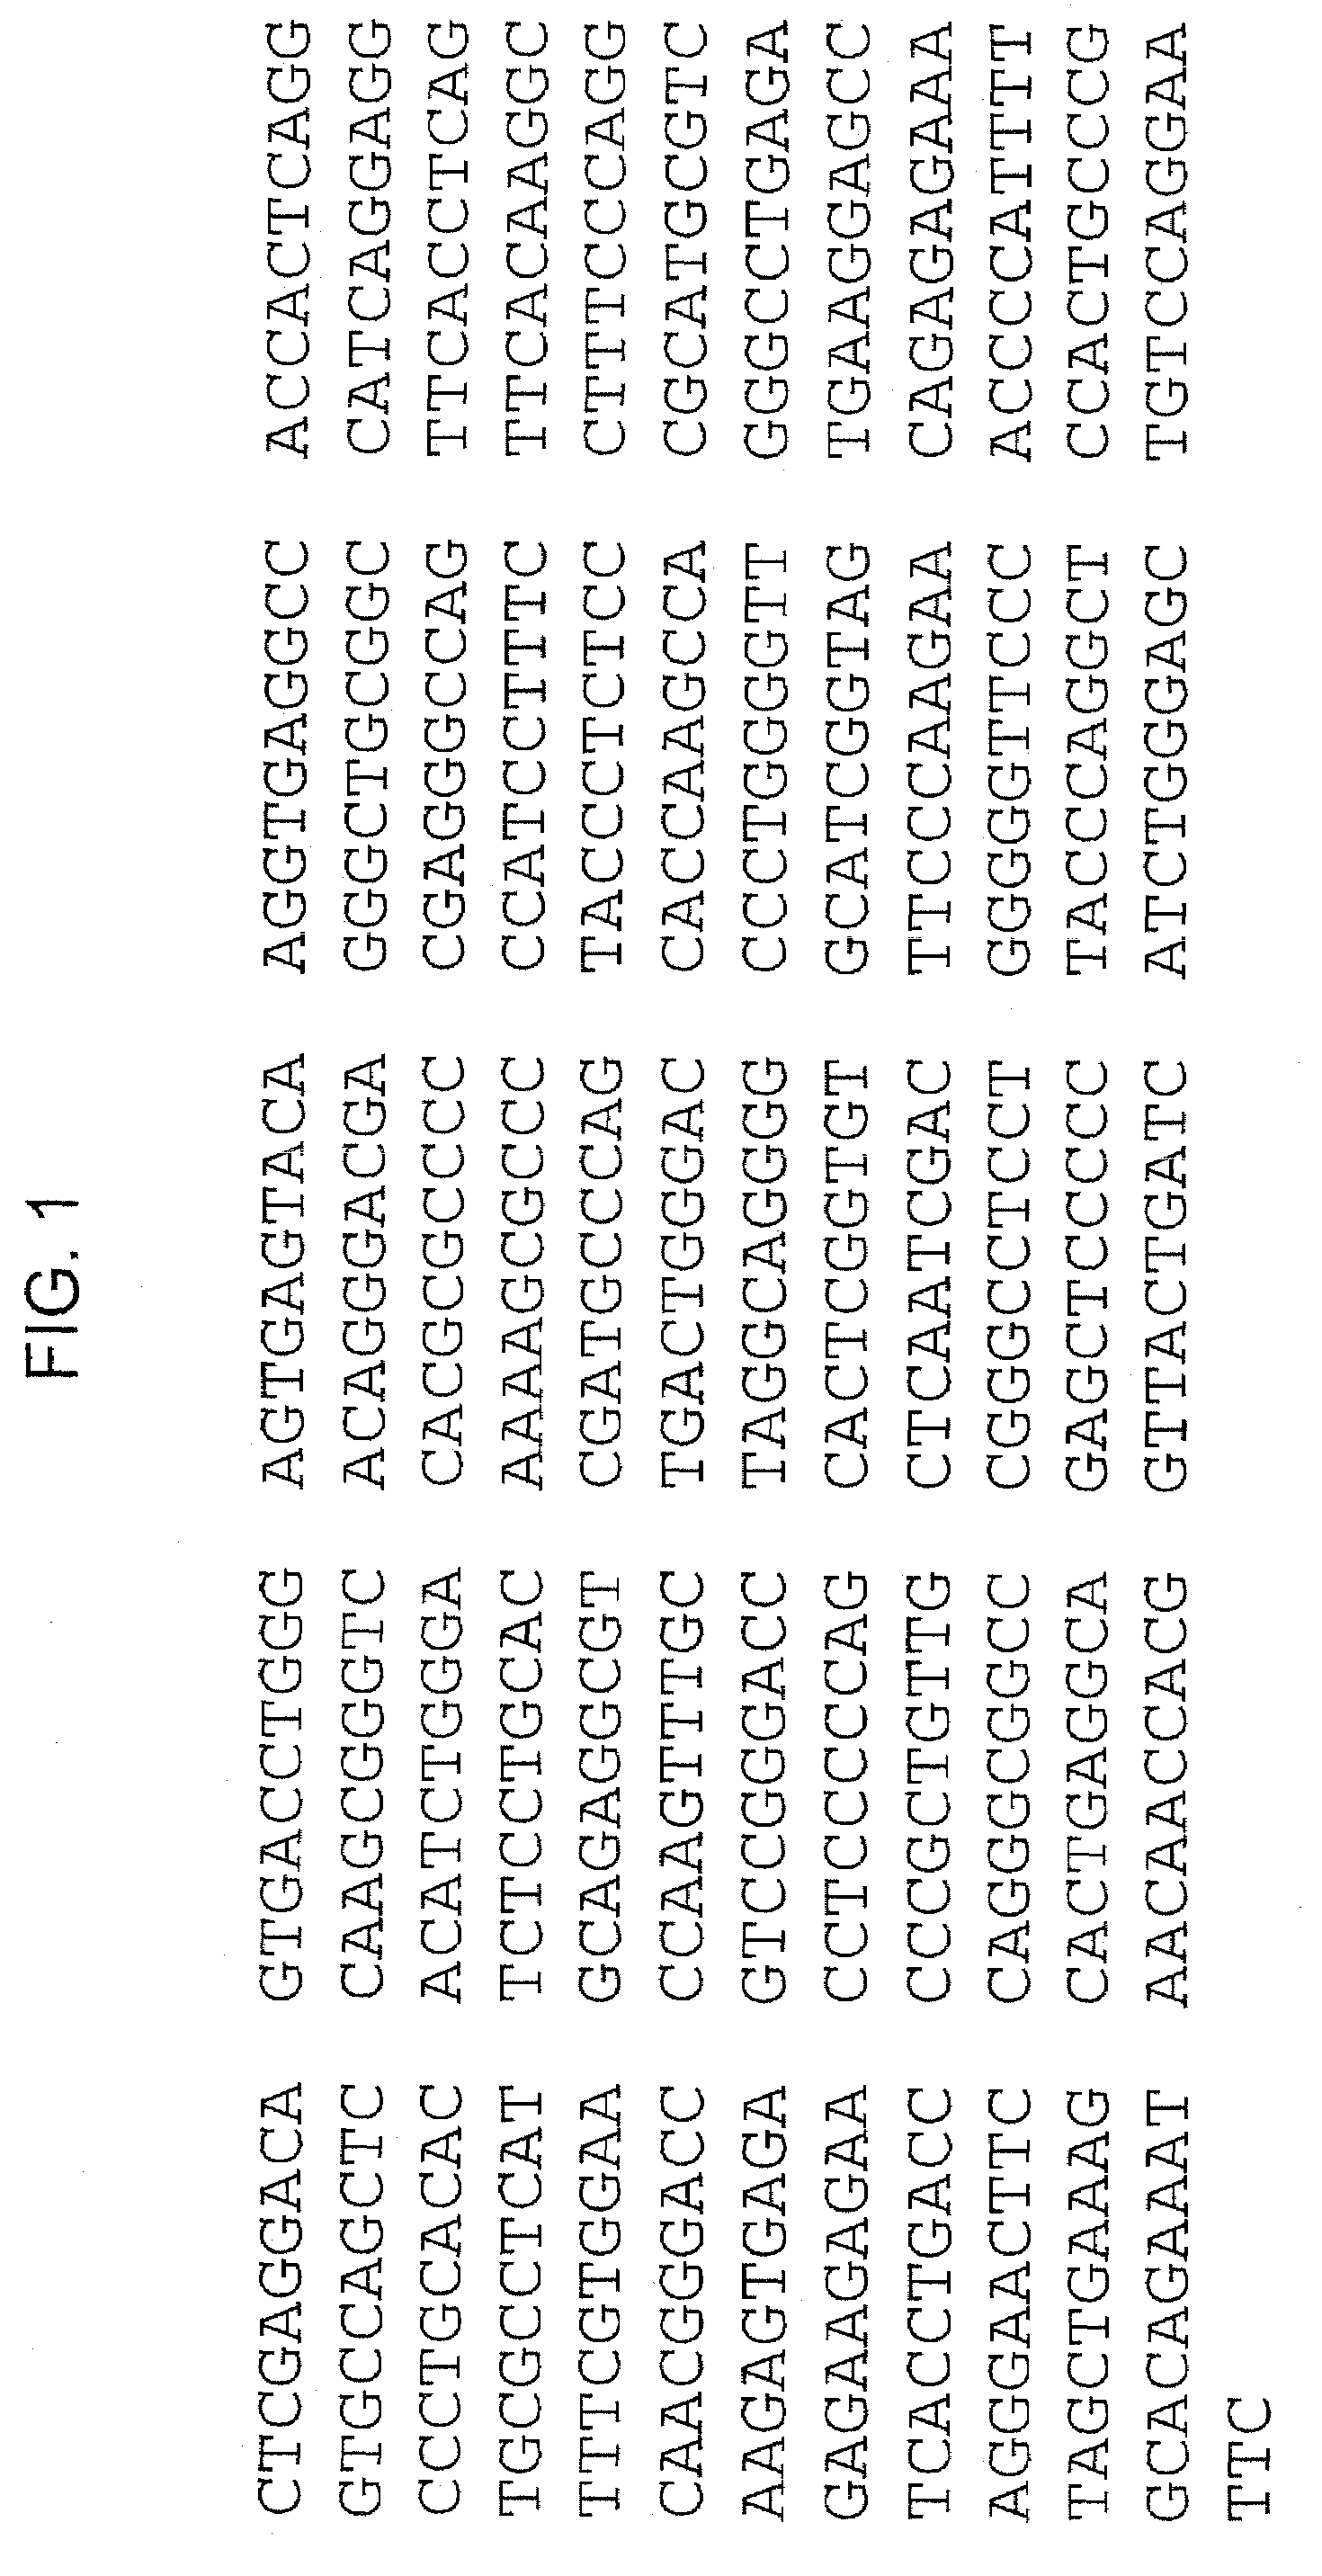 Method for identifying compounds that modulate RXR associated processes with IgE production